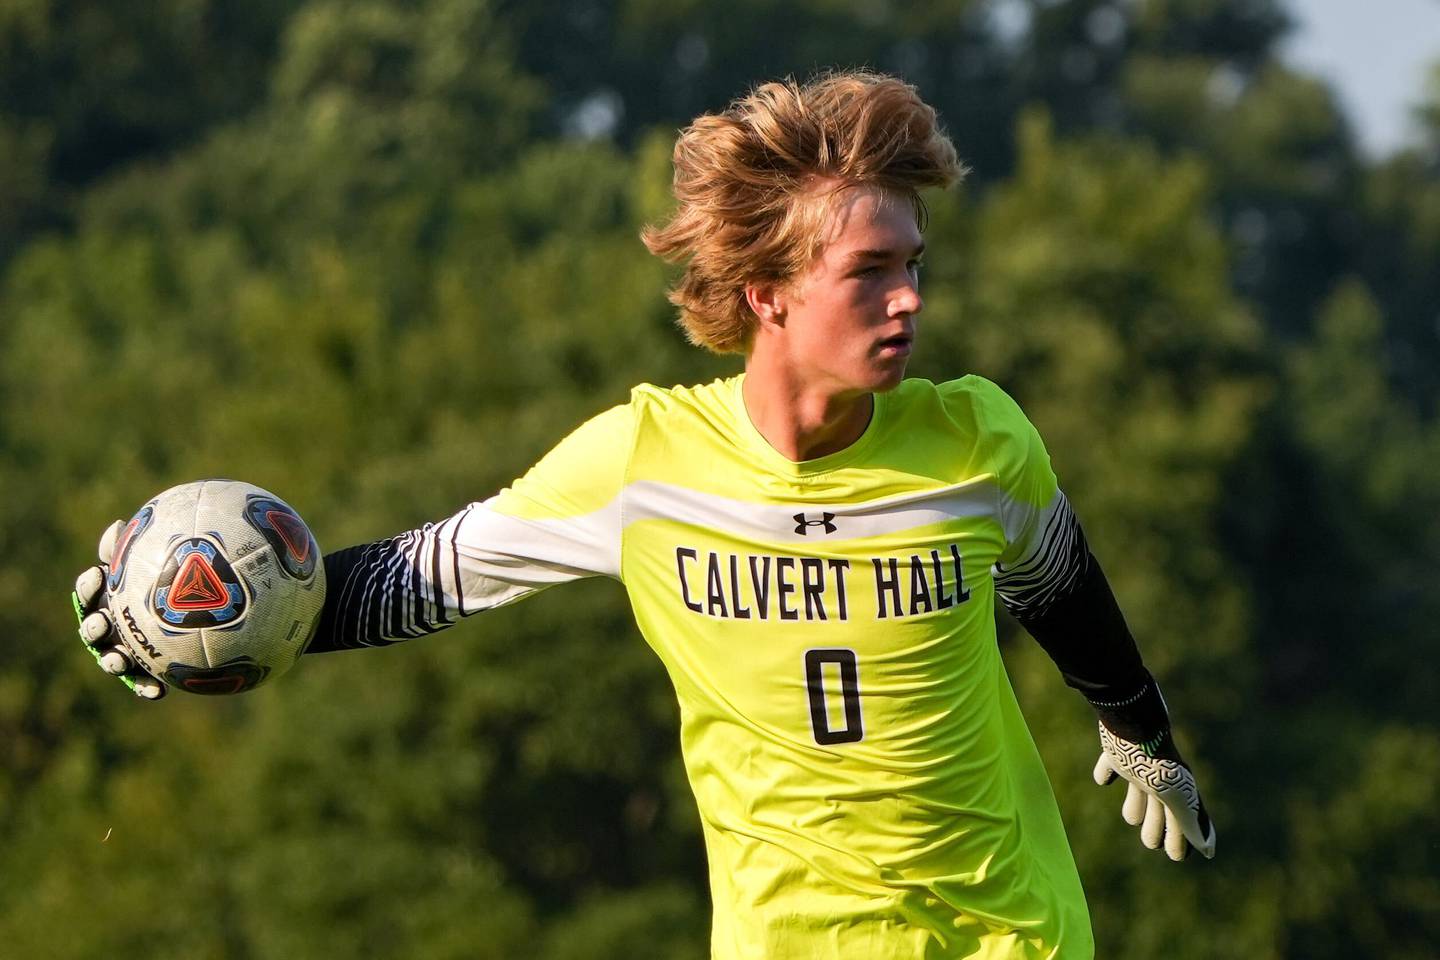 Calvert Hall goalkeeper Nathen Jones (0) throws the ball back into play in the second half of a boys soccer game at McDonogh School on 8/26/22. Calvert Hall defeated McDonogh, 1-0, in overtime.